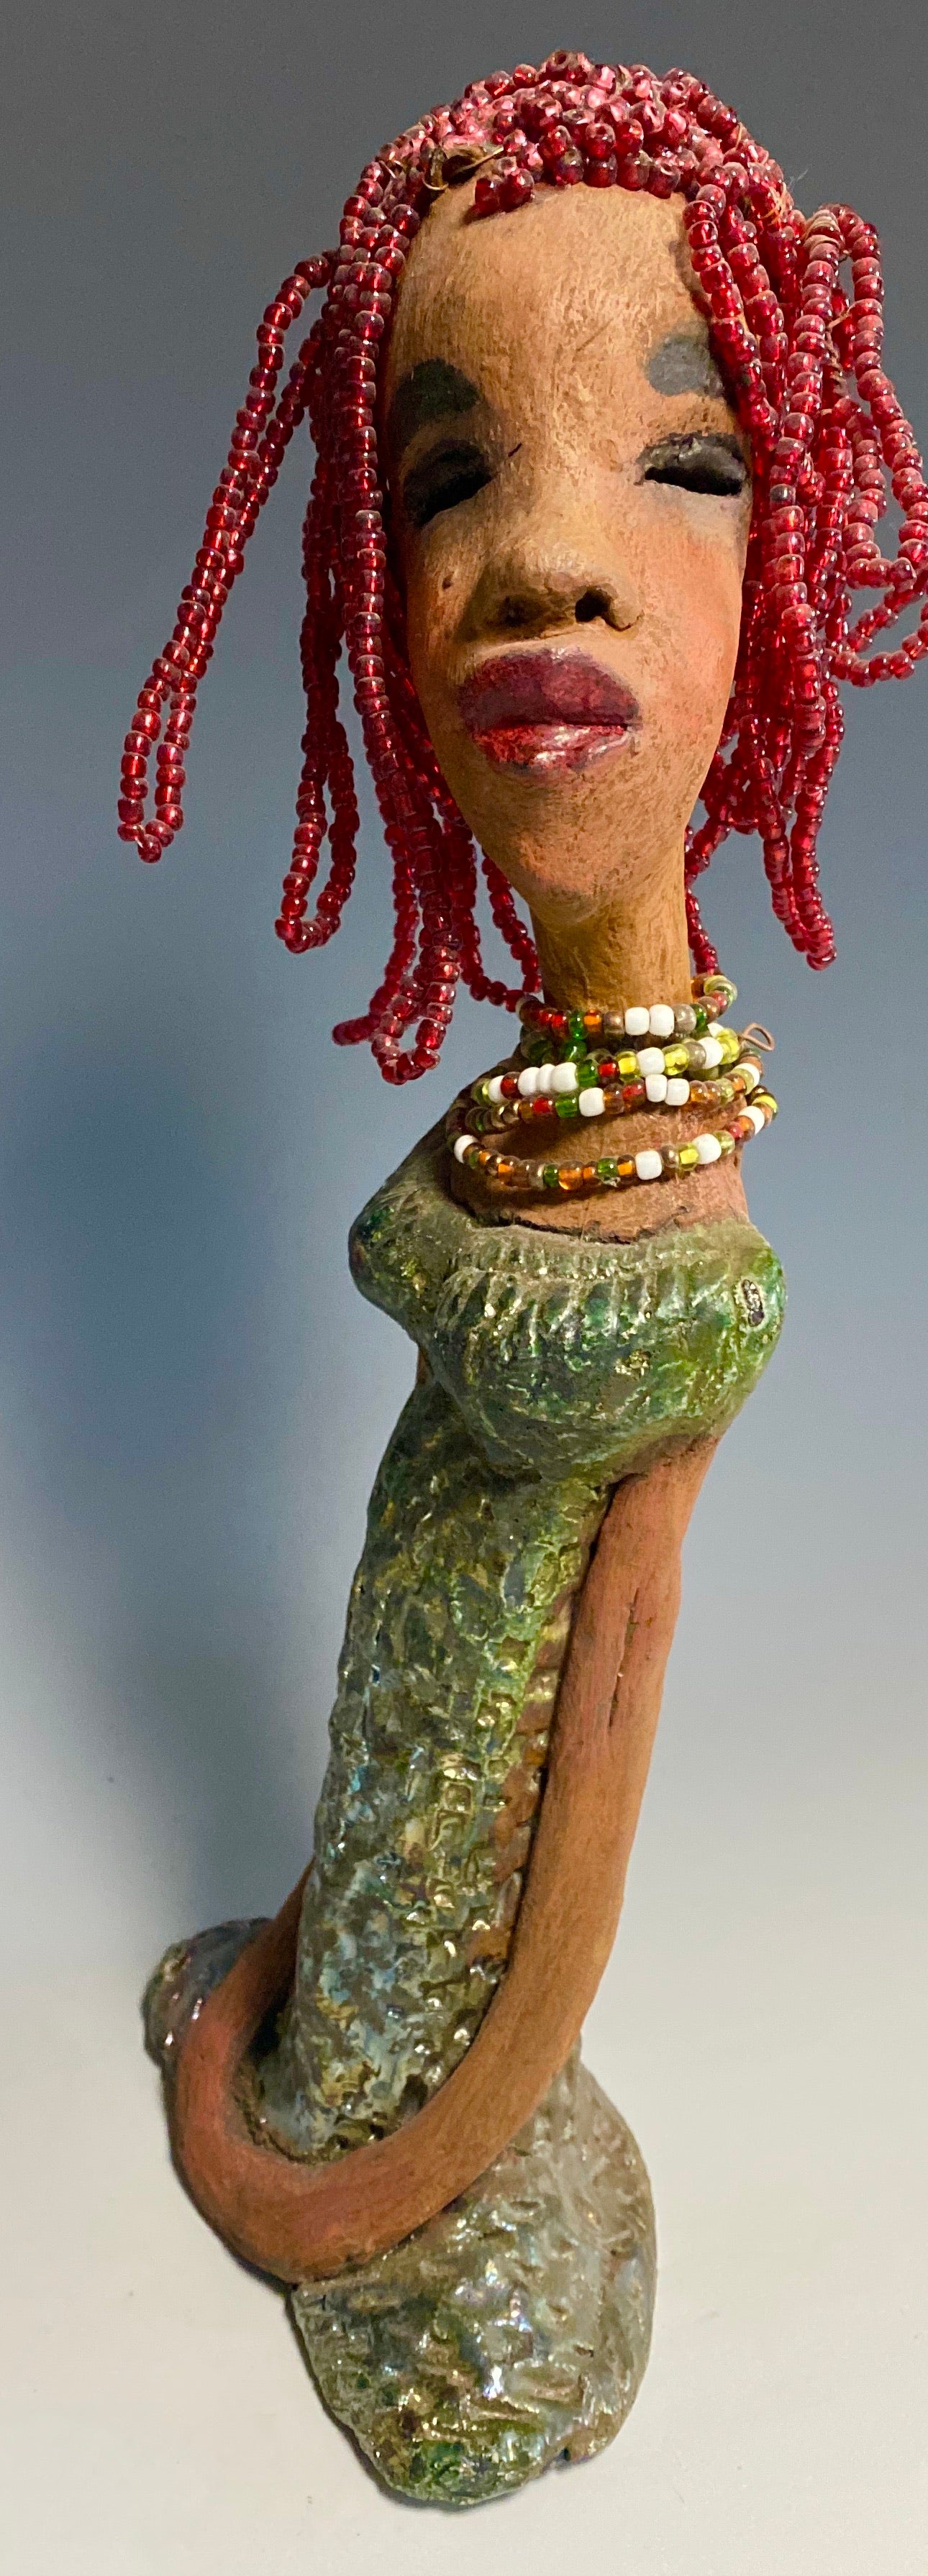 Meet July!﻿﻿ July stands 14" x 5" x 3" and weighs 2.05 lbs. July has a head full of red beaded hair. She has a honey brown complexion. July dress has a metallic textured copper green.  She wears a multi colored beaded necklace. With her head slightly turned her long loving arms gently rest at her side.